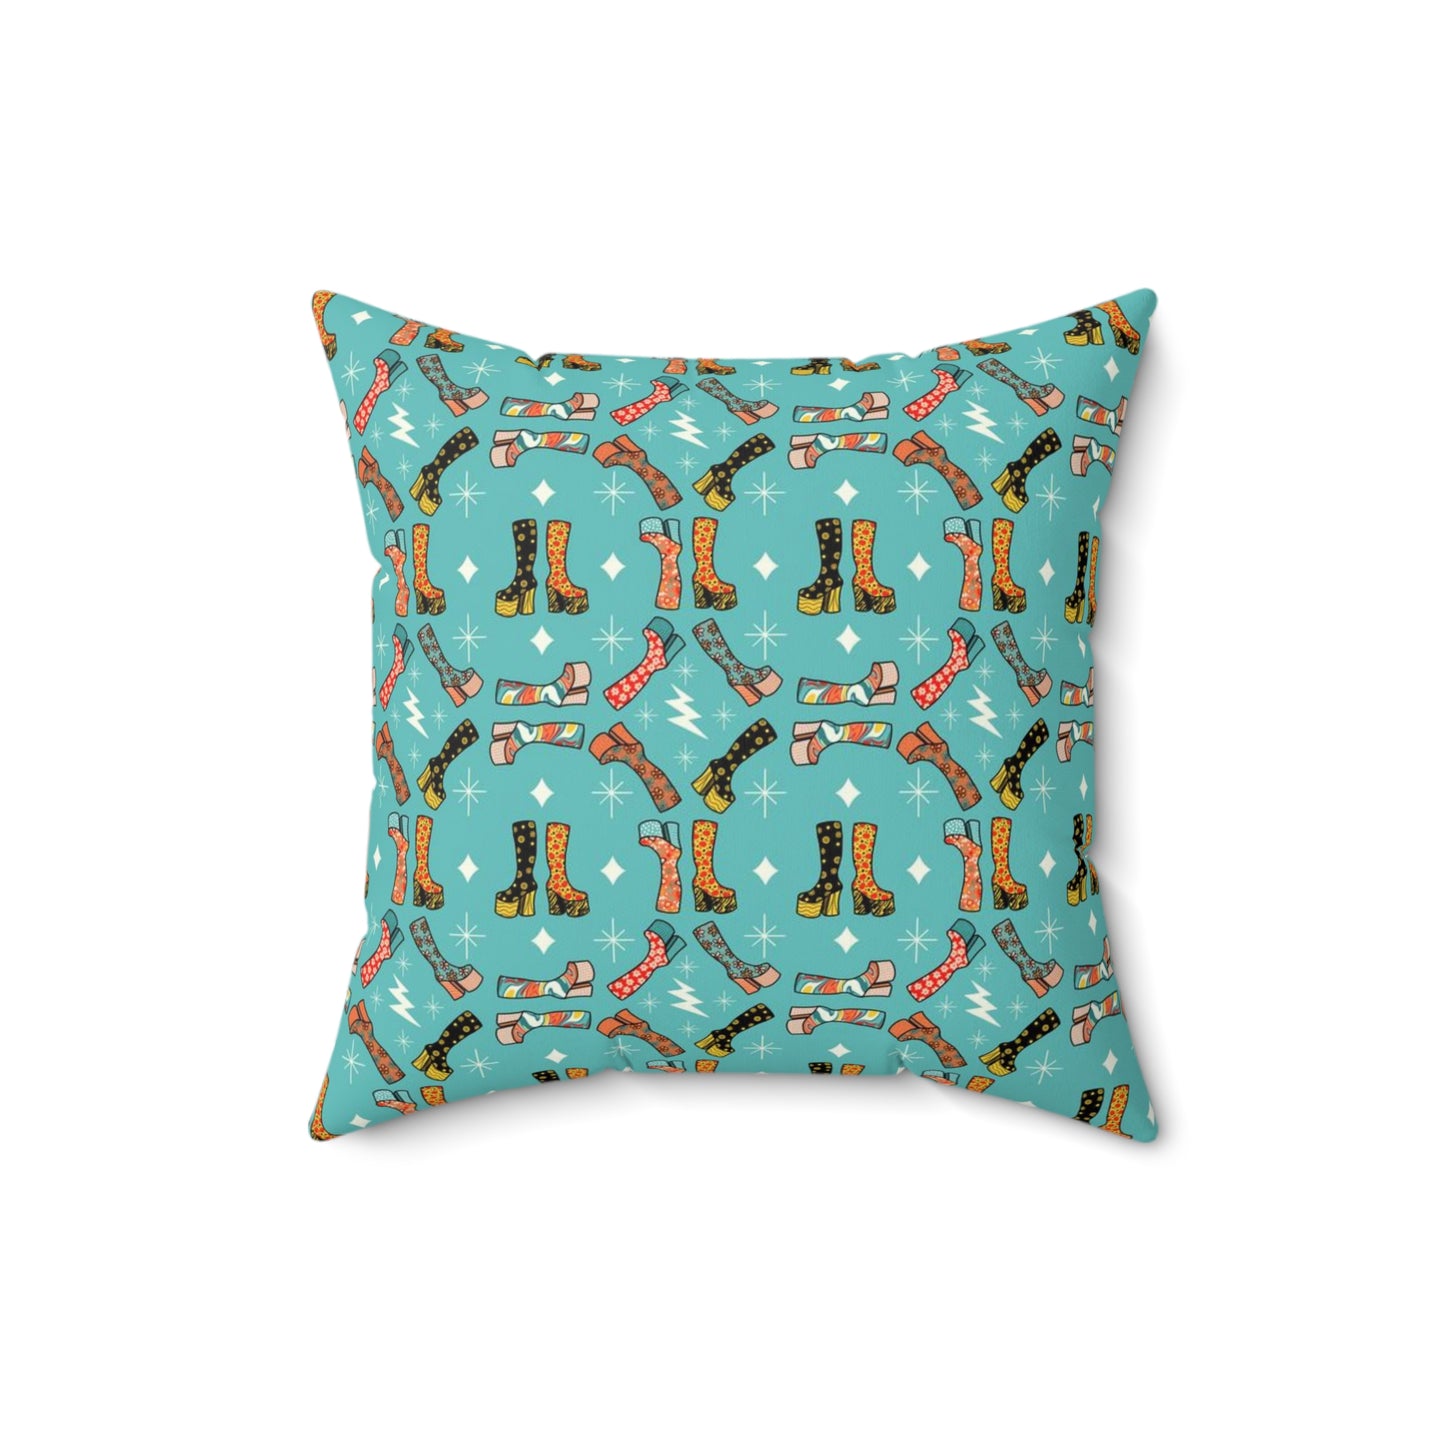 Groovy Boots Spun Polyester Square Pillow